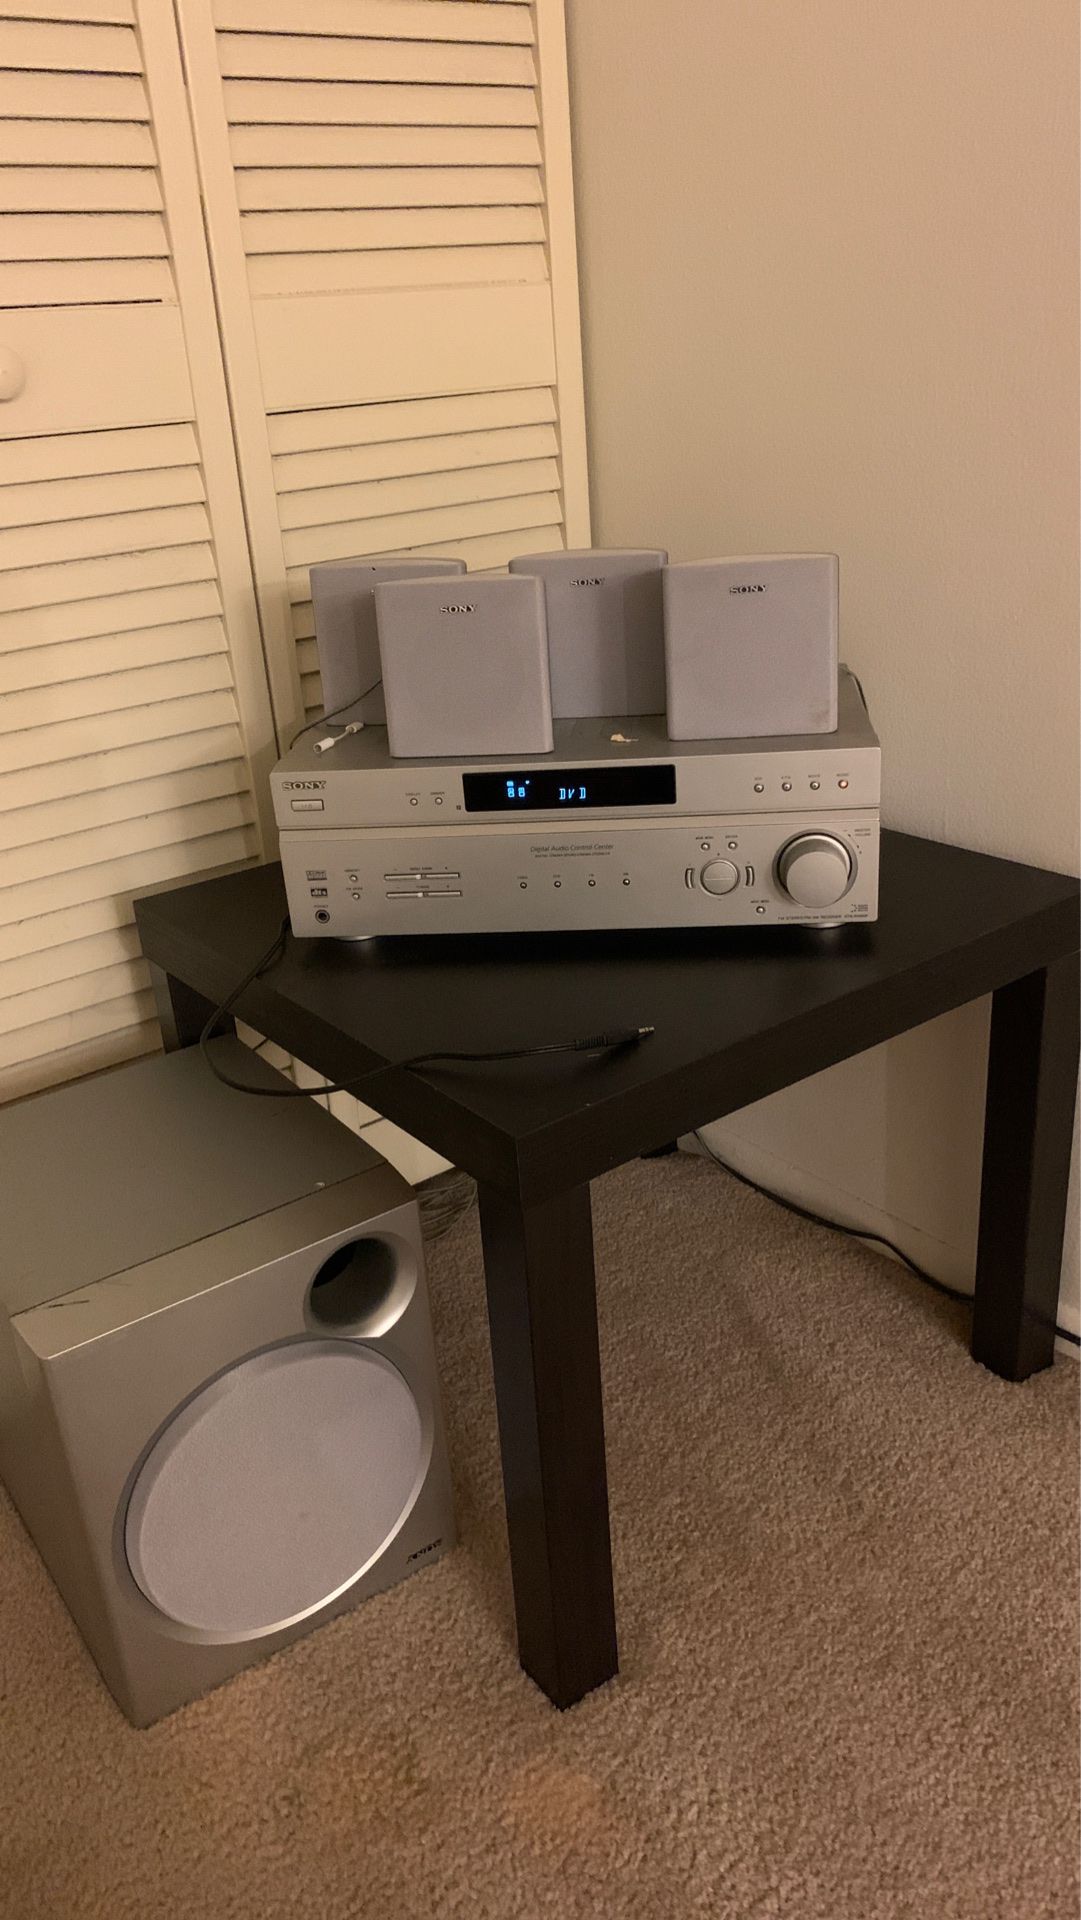 Table with a Sony stereo system